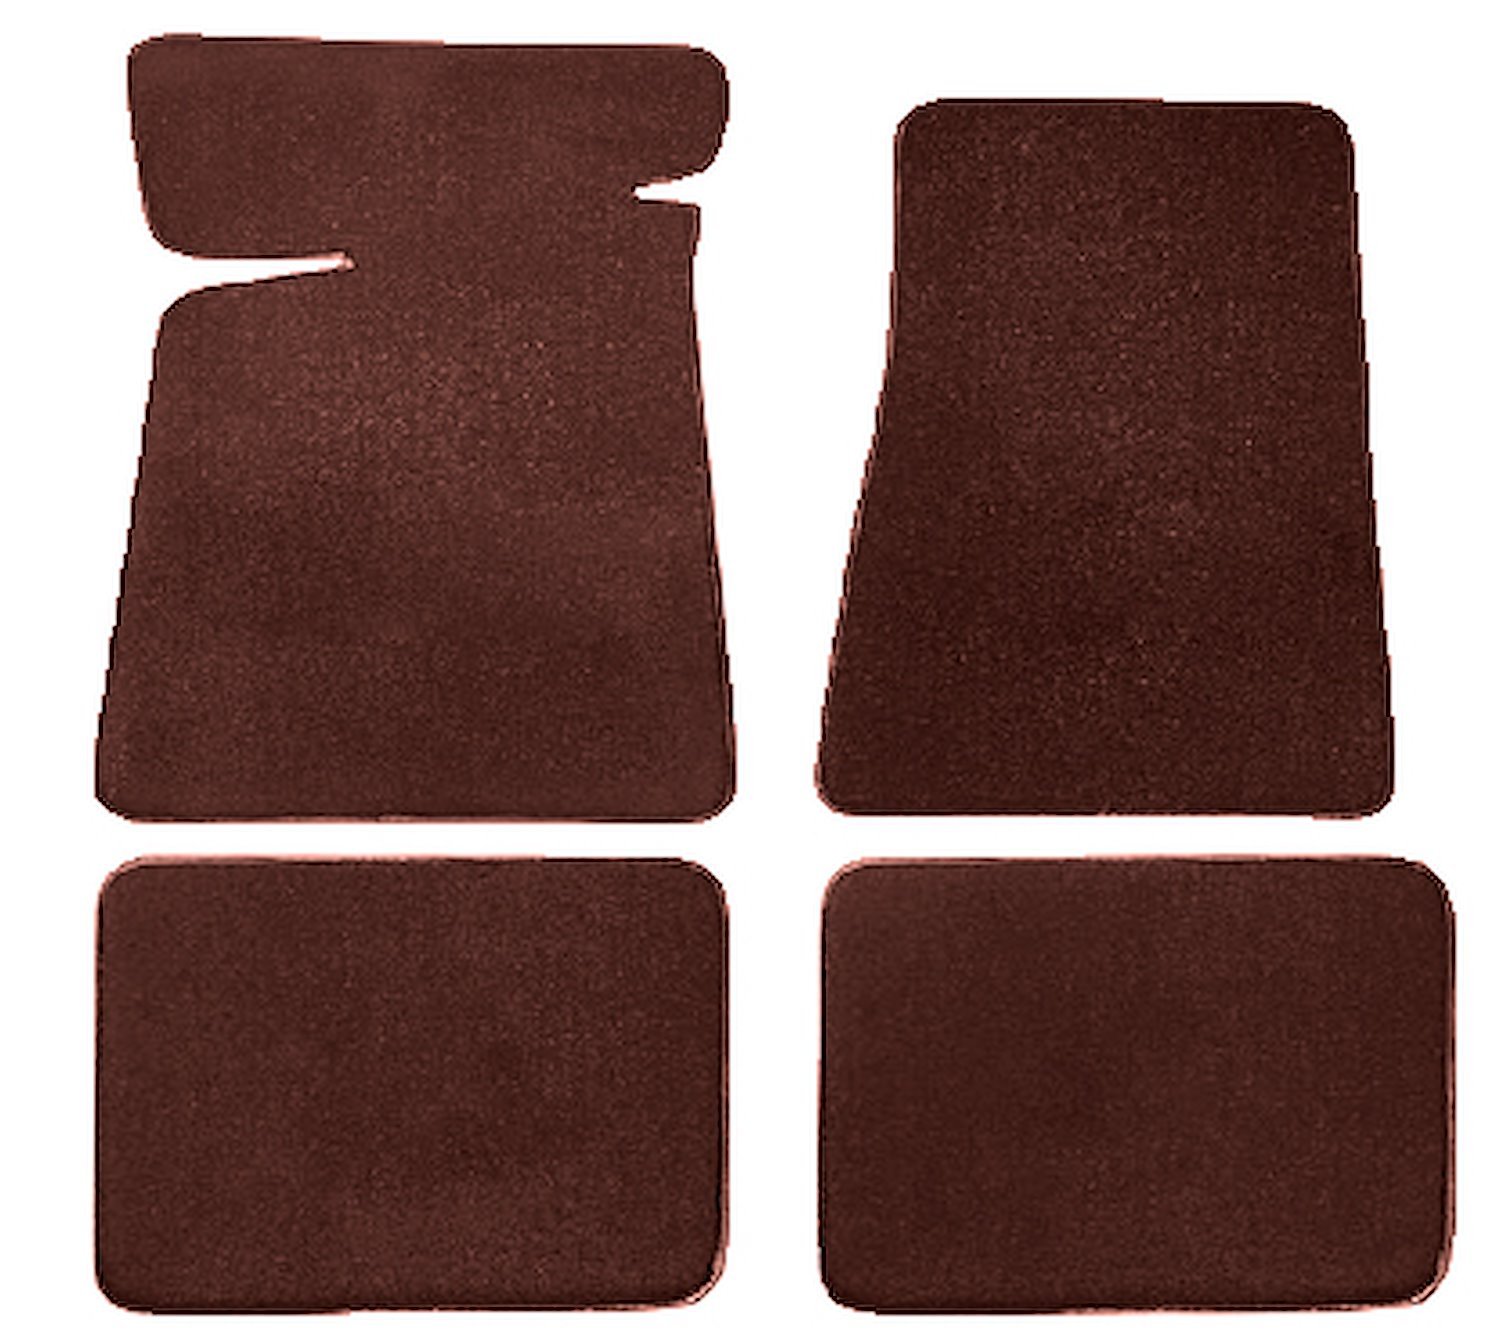 Molded Cut Pile Floor Mats Fits Select 1978-1987 Buick, Chevrolet, Oldsmobile, Ponitac Models [4-Piece, Maple/Canyon]